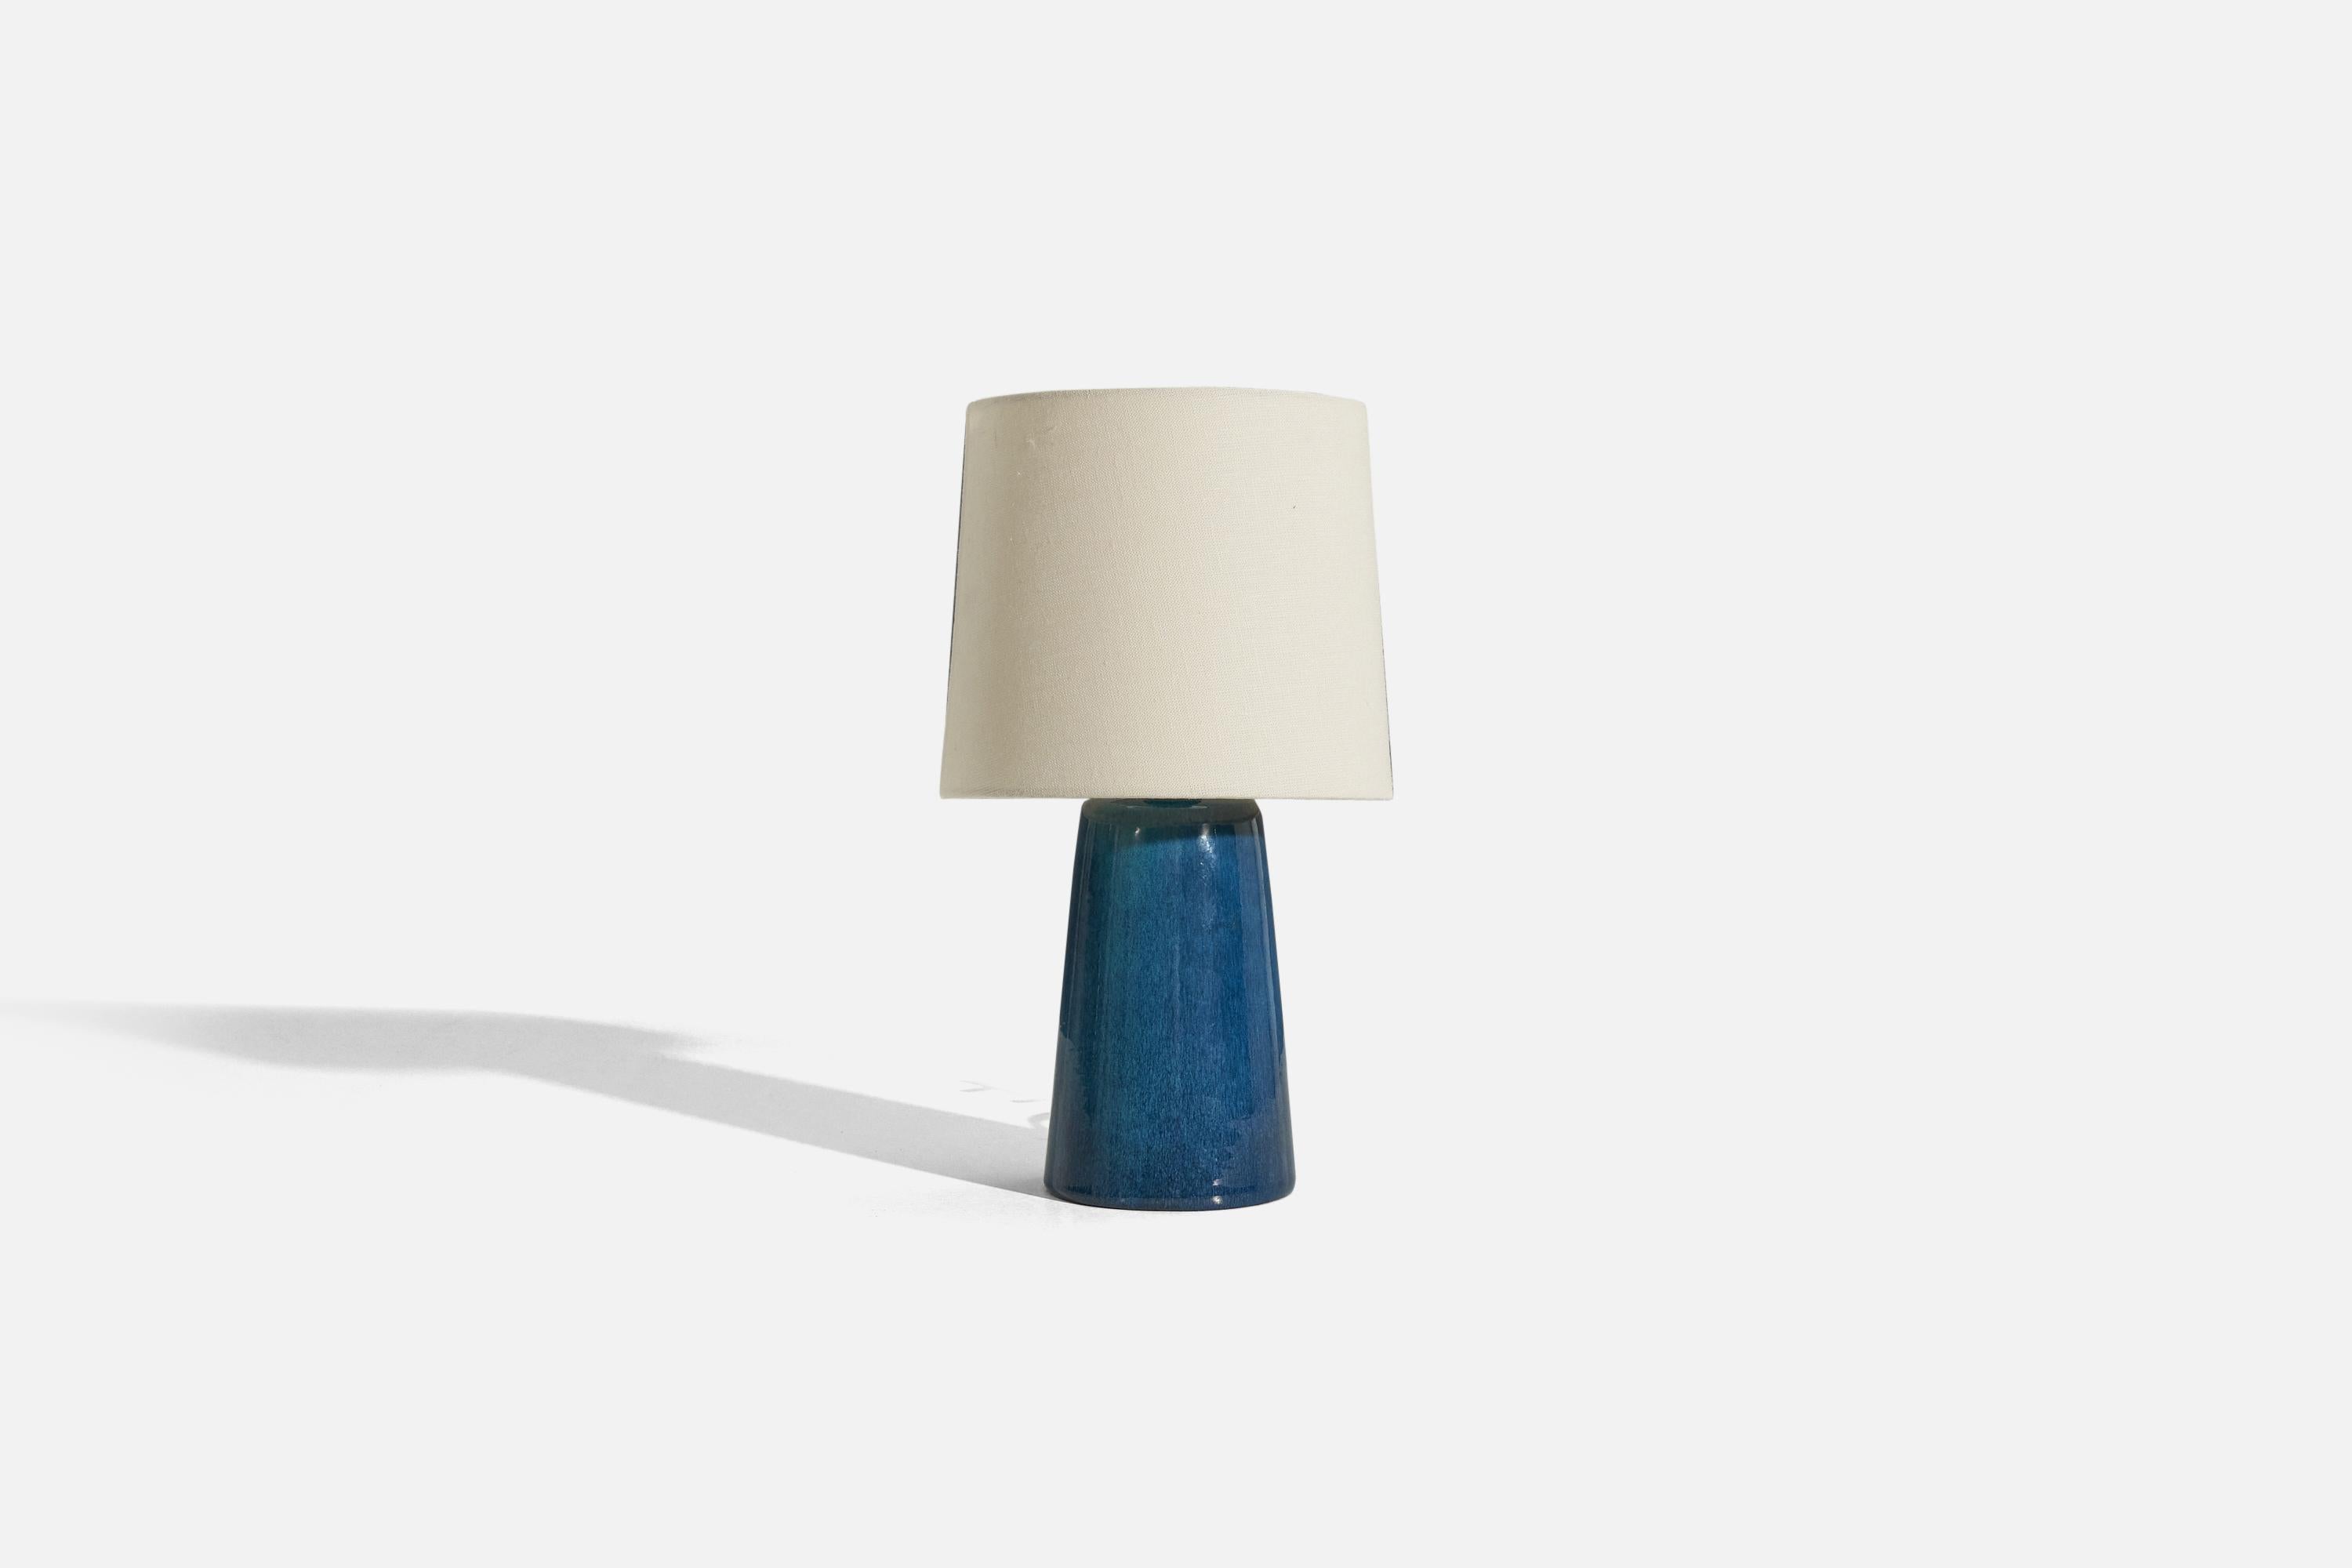 A blue-glazed stoneware and teak table lamp designed and produced in Denmark, 1960s.

Sold without lampshade. 
Dimensions of Lamp (inches) : 10.125 x 4.5 x 4.5 (H x W x D)
Dimensions of Shade (inches) : 7 x 8 x 7 (T x B x S)
Dimension of Lamp with